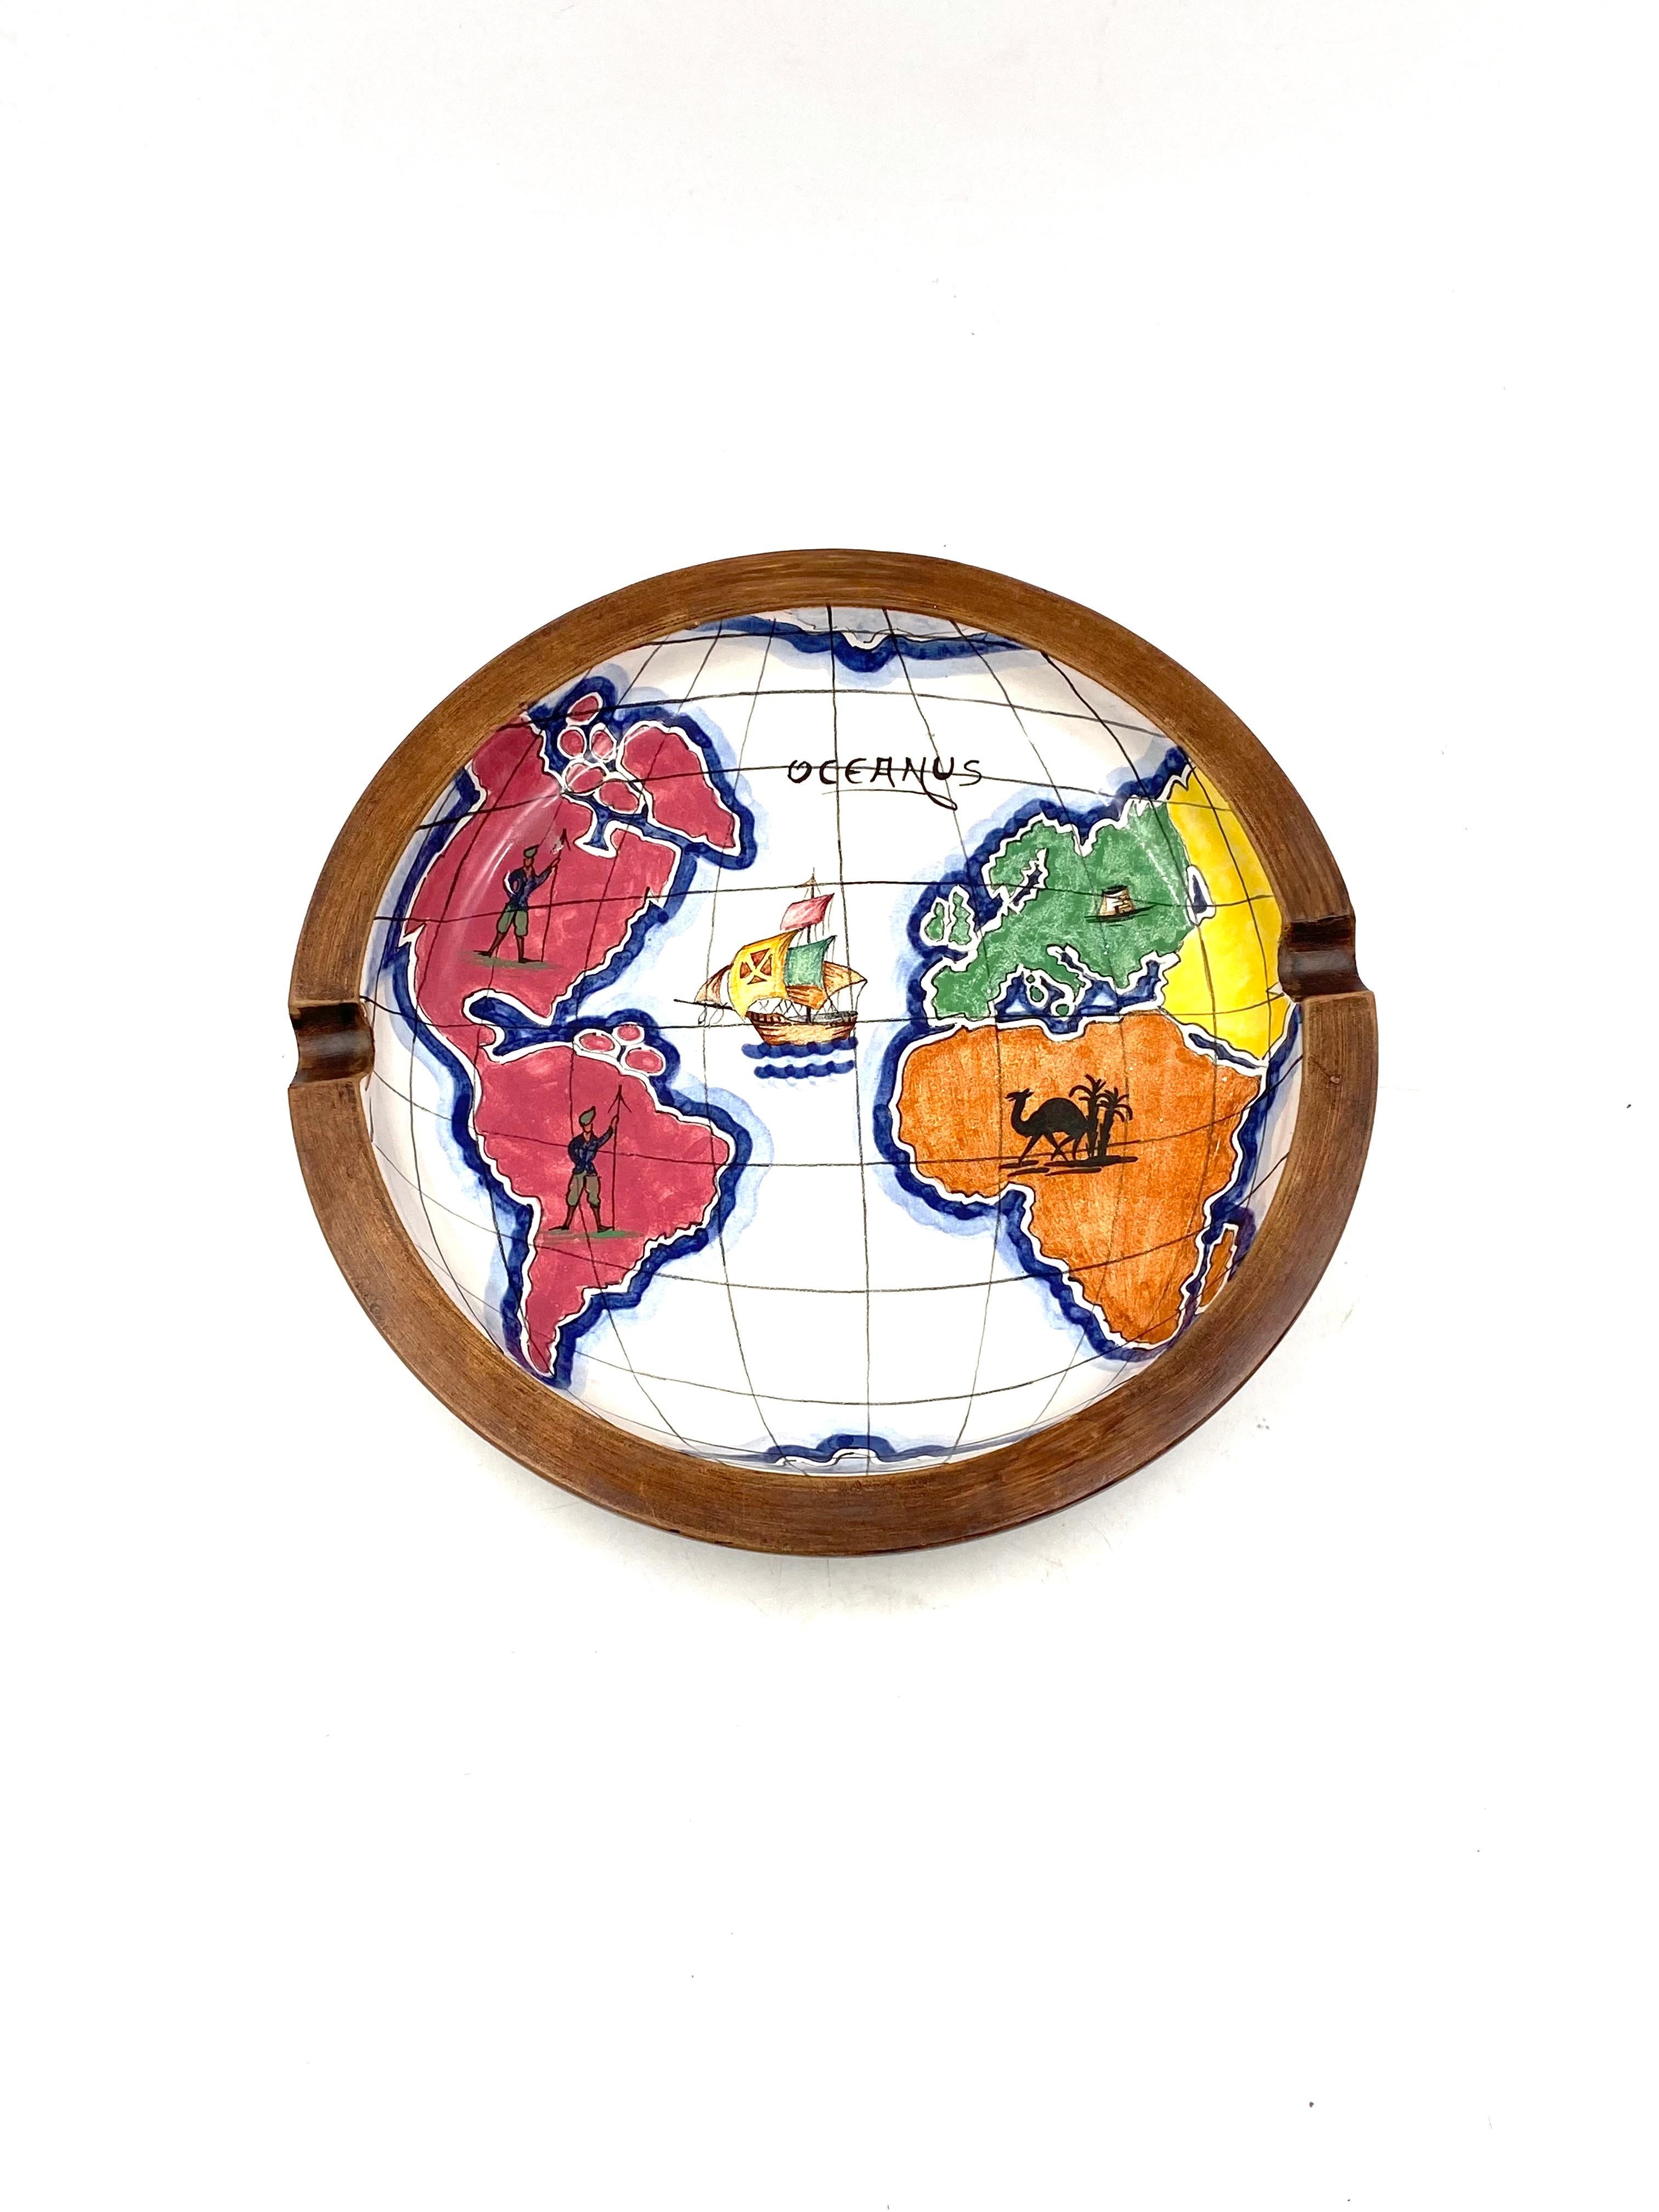 Polychrome Ceramic World Map Catchall / Ashtray, Zaccagnini, Italy, 1940s For Sale 5